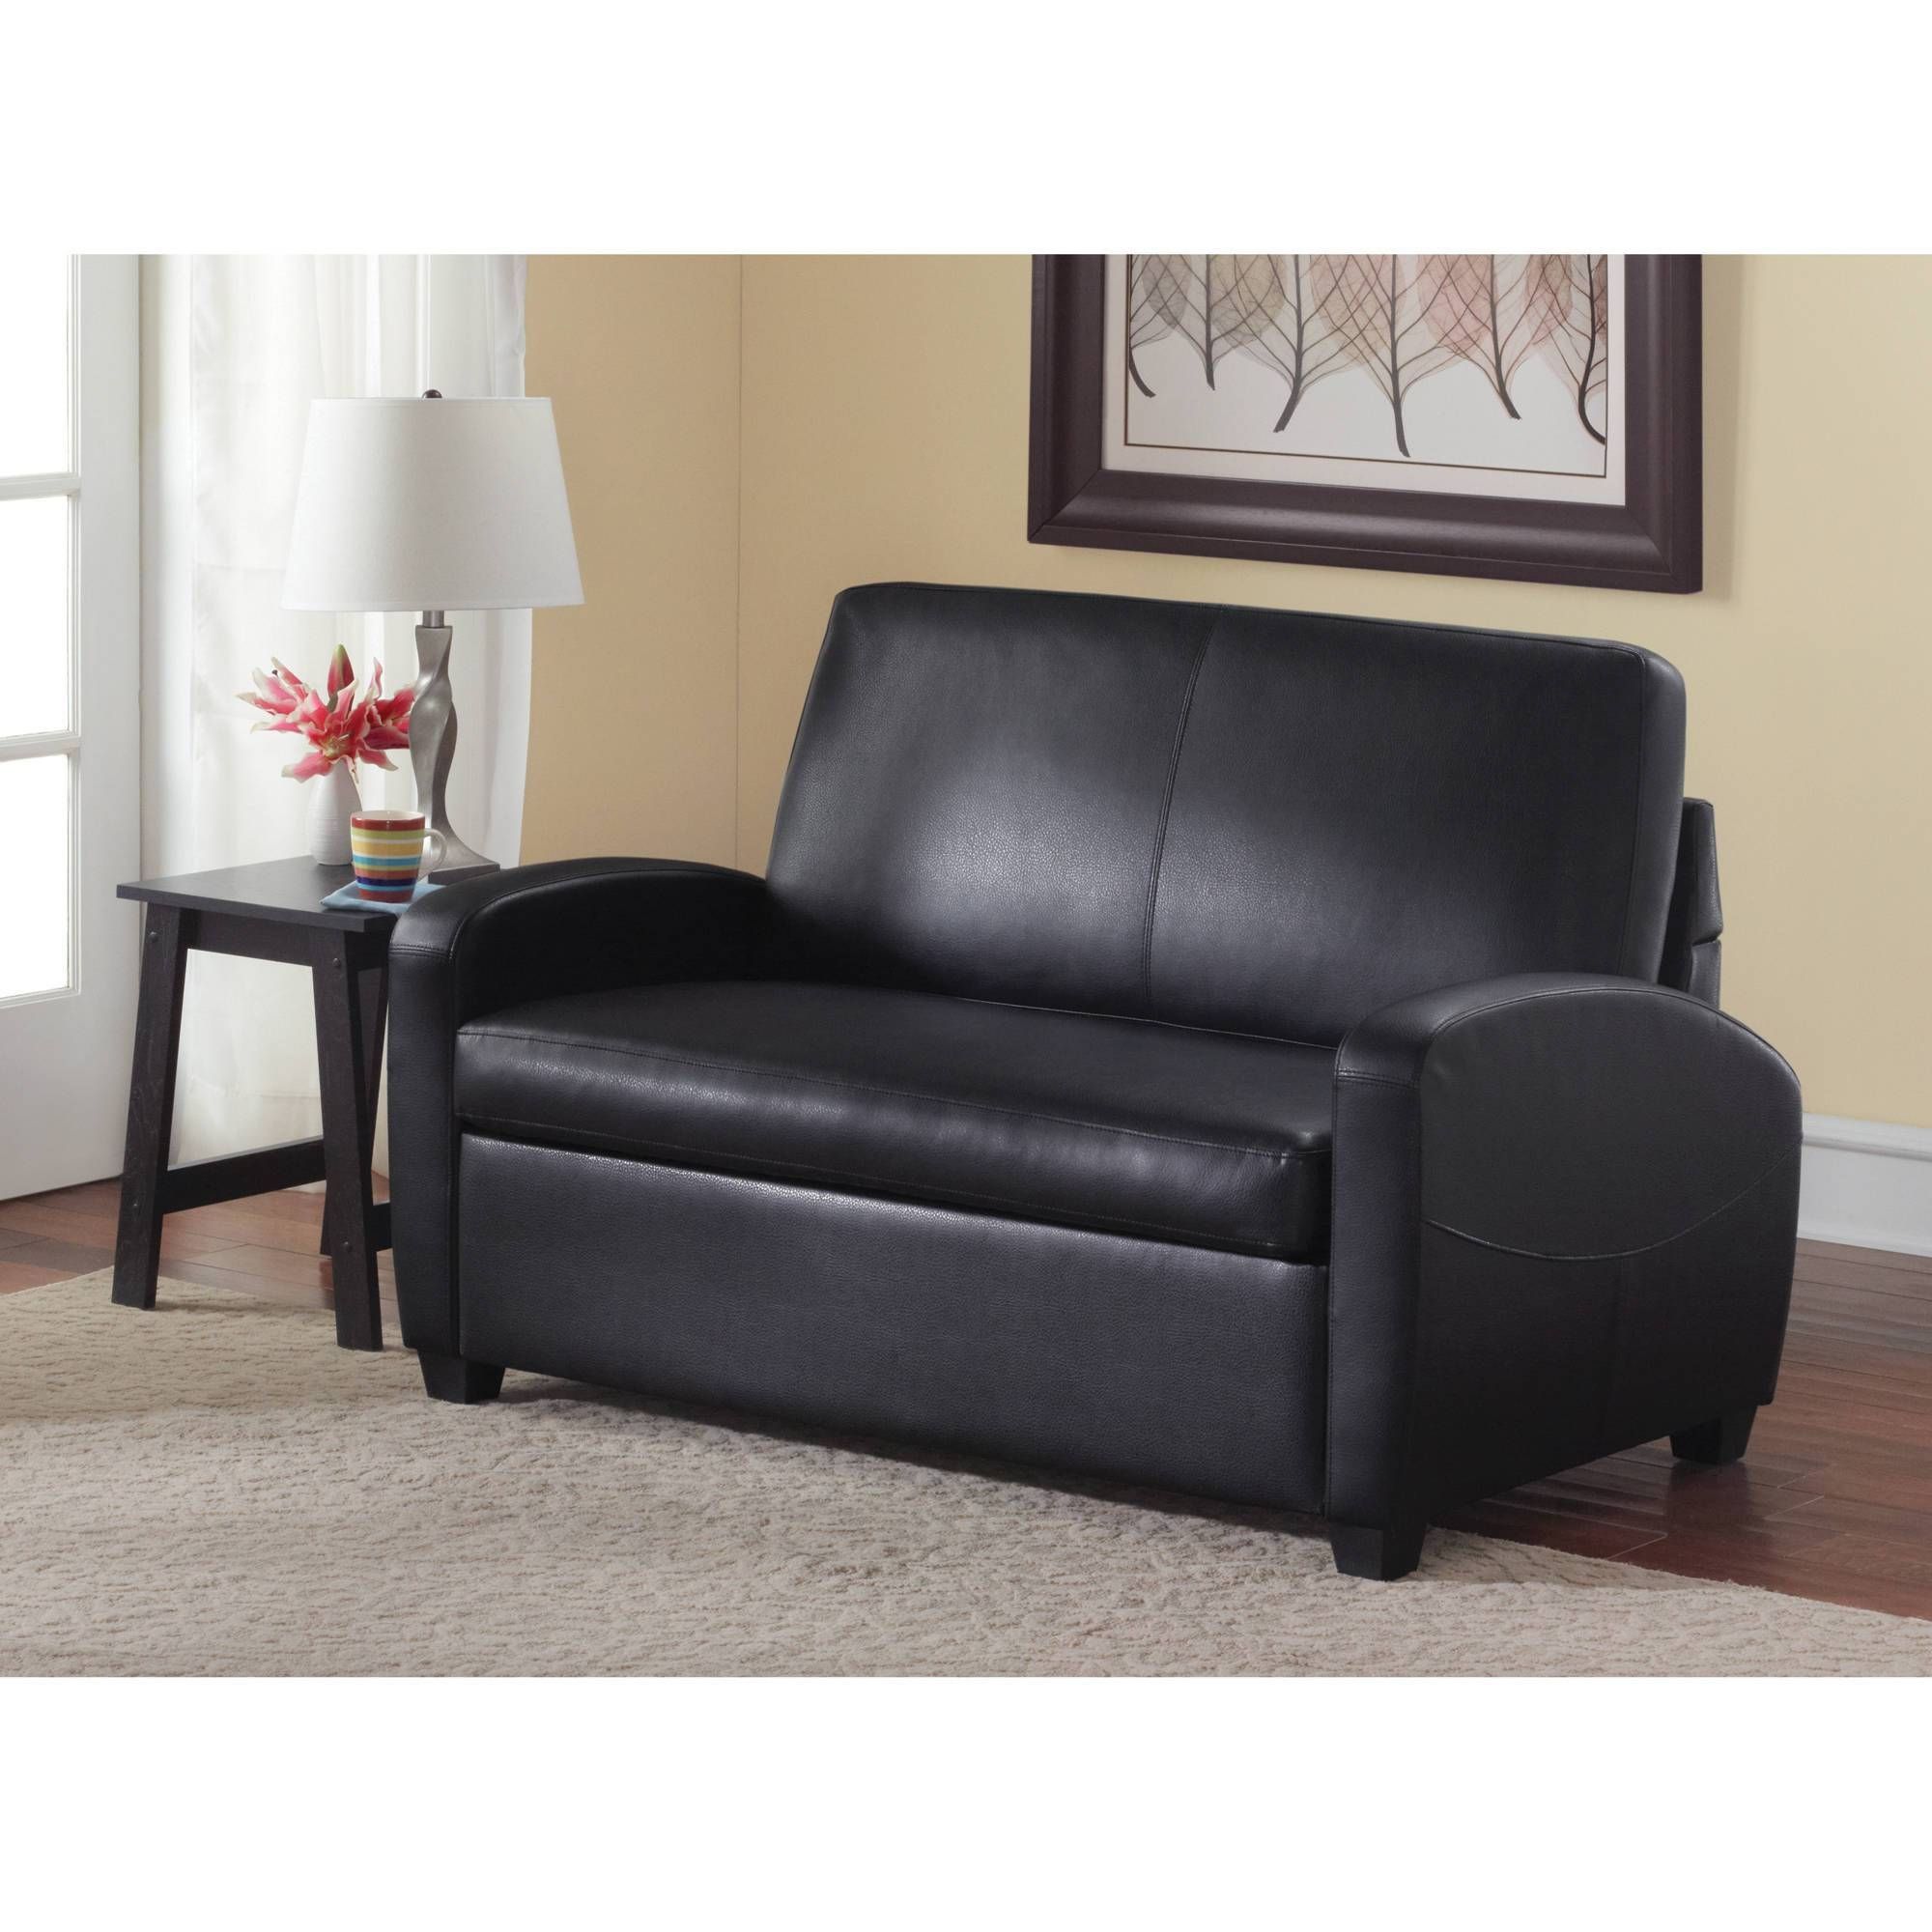 Mainstays Sofa Sleeper, Black – Walmart Intended For Mainstay Sofas (View 1 of 15)